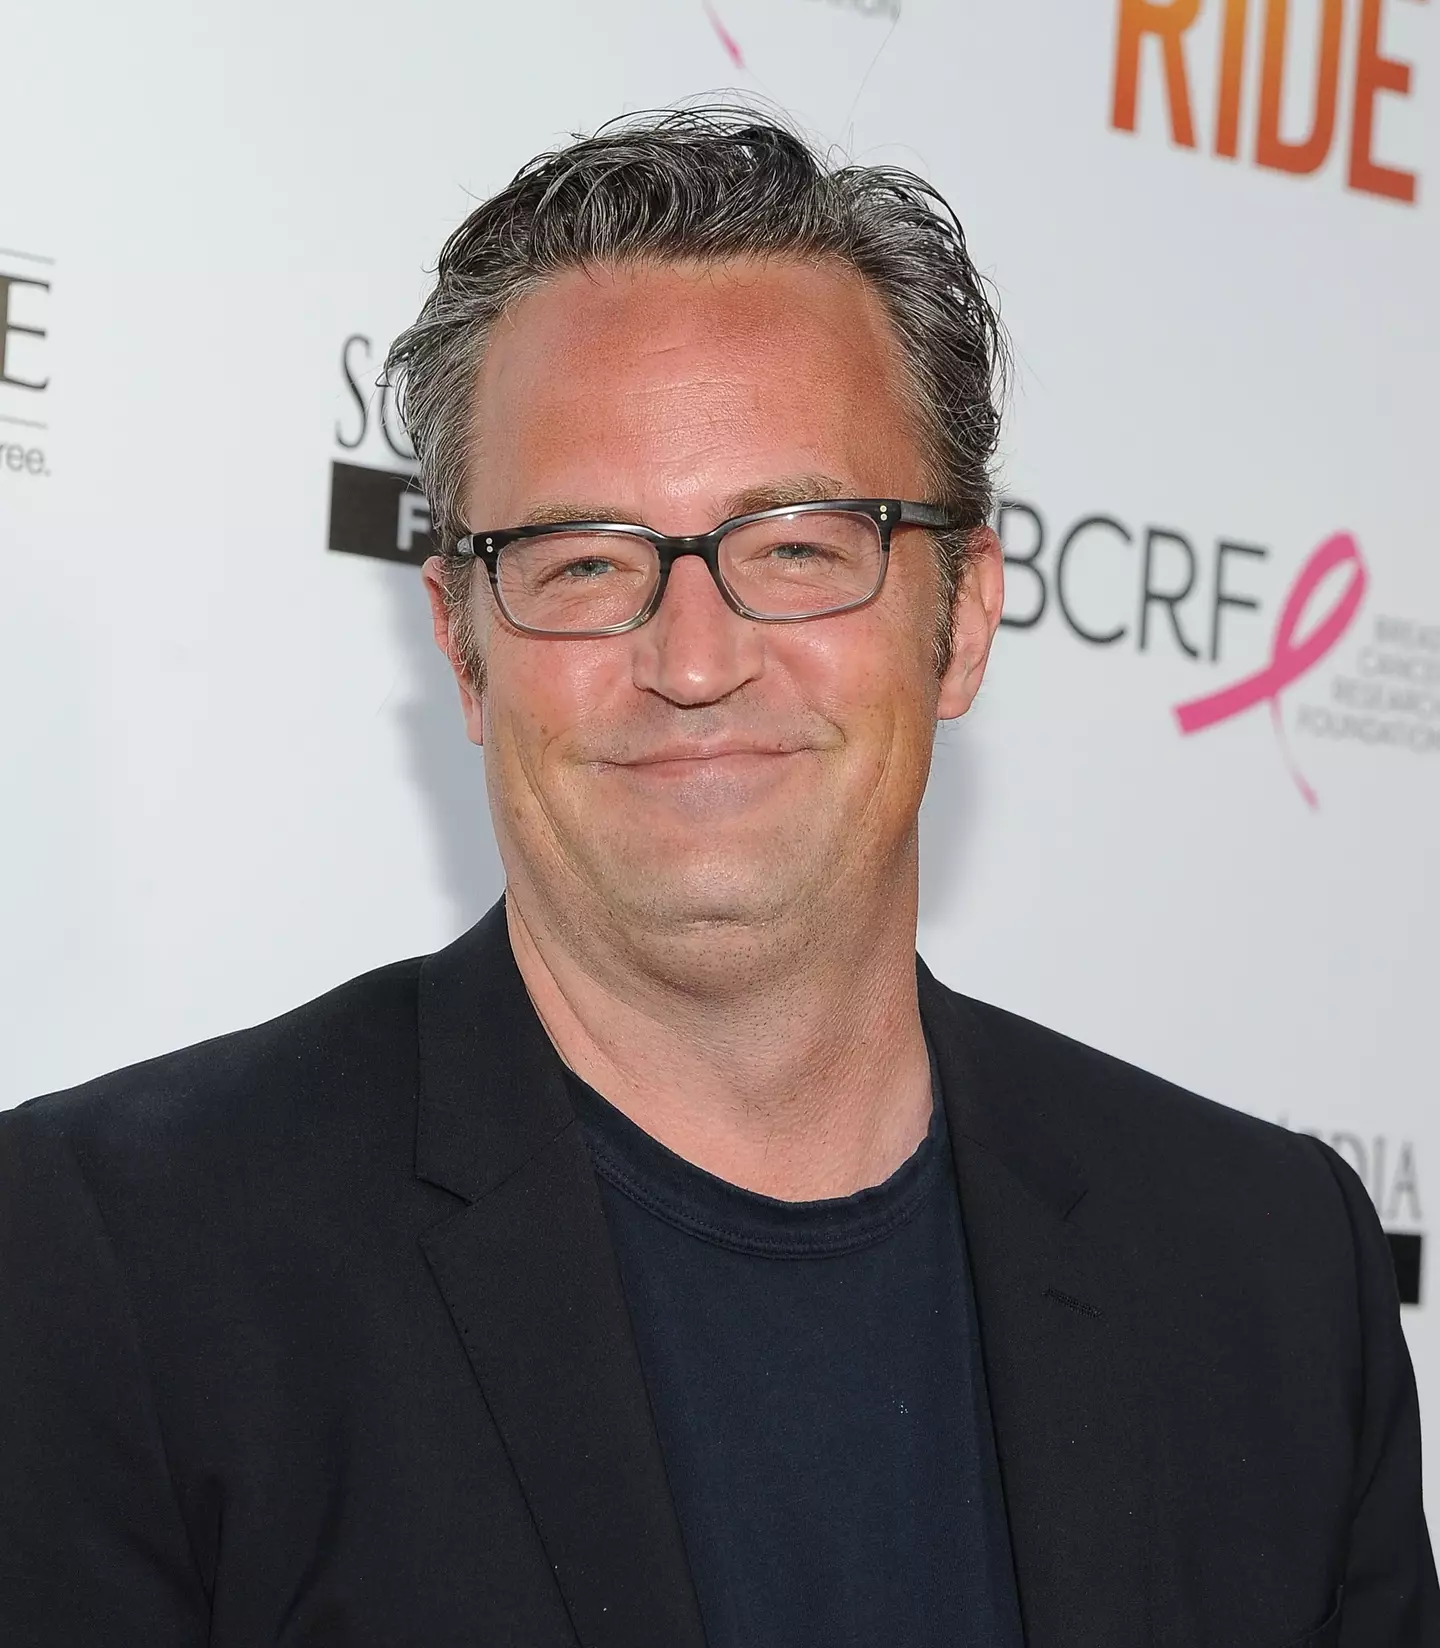 Fans are heartbroken at the news of Matthew Perry's passing.